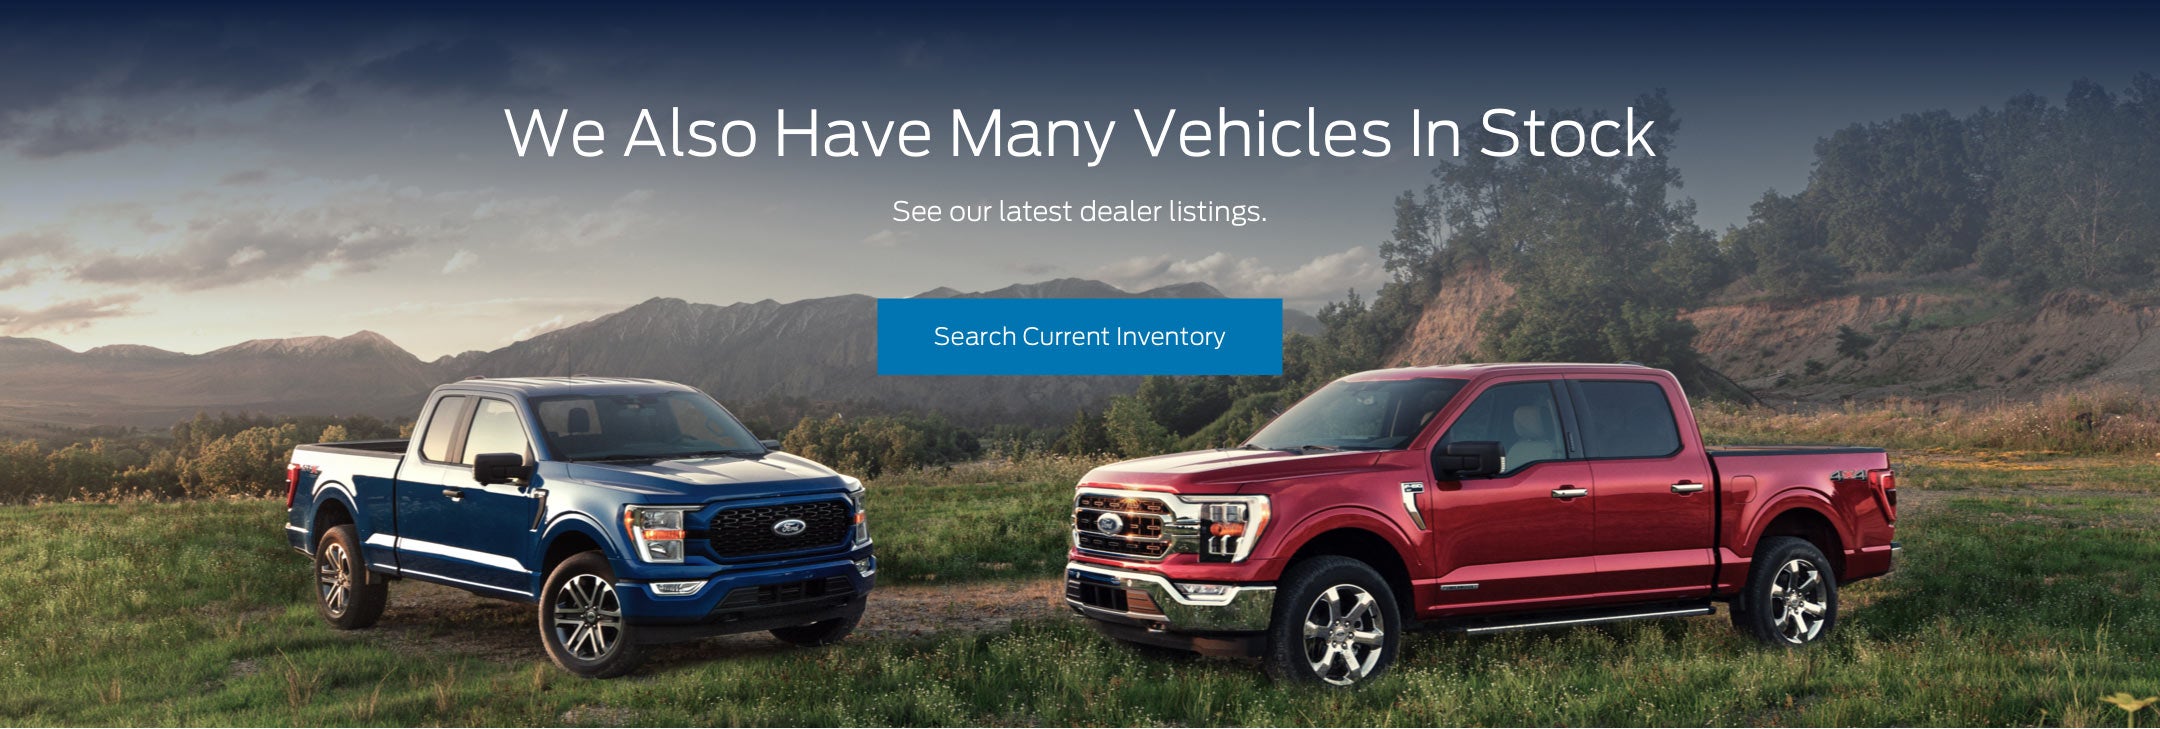 Ford vehicles in stock | Matthews Ford of Pryor in Pryor OK